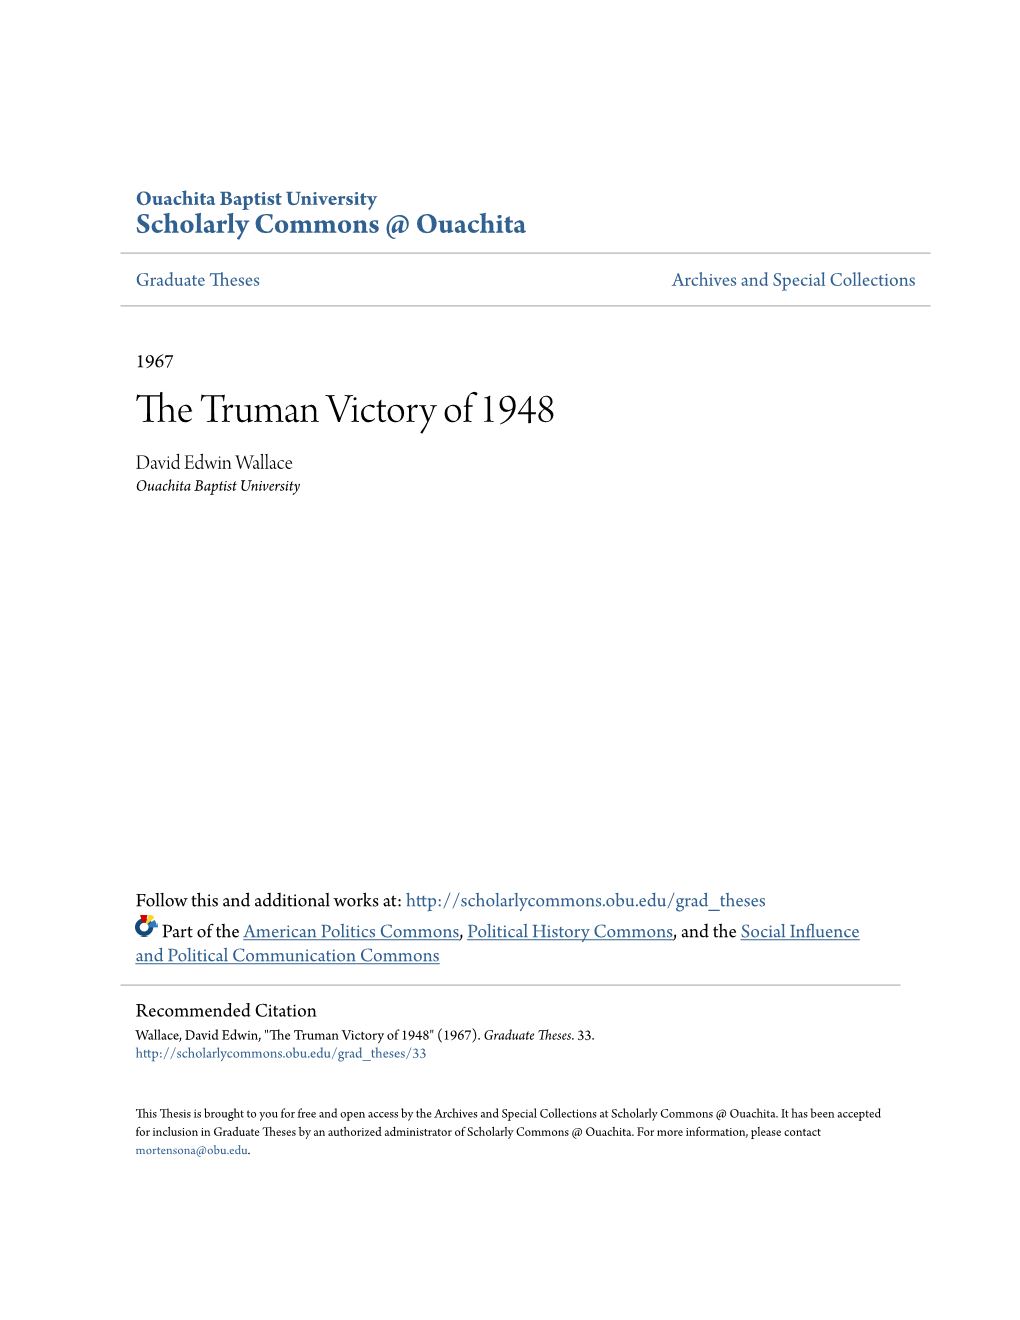 The Truman Victory of 1948